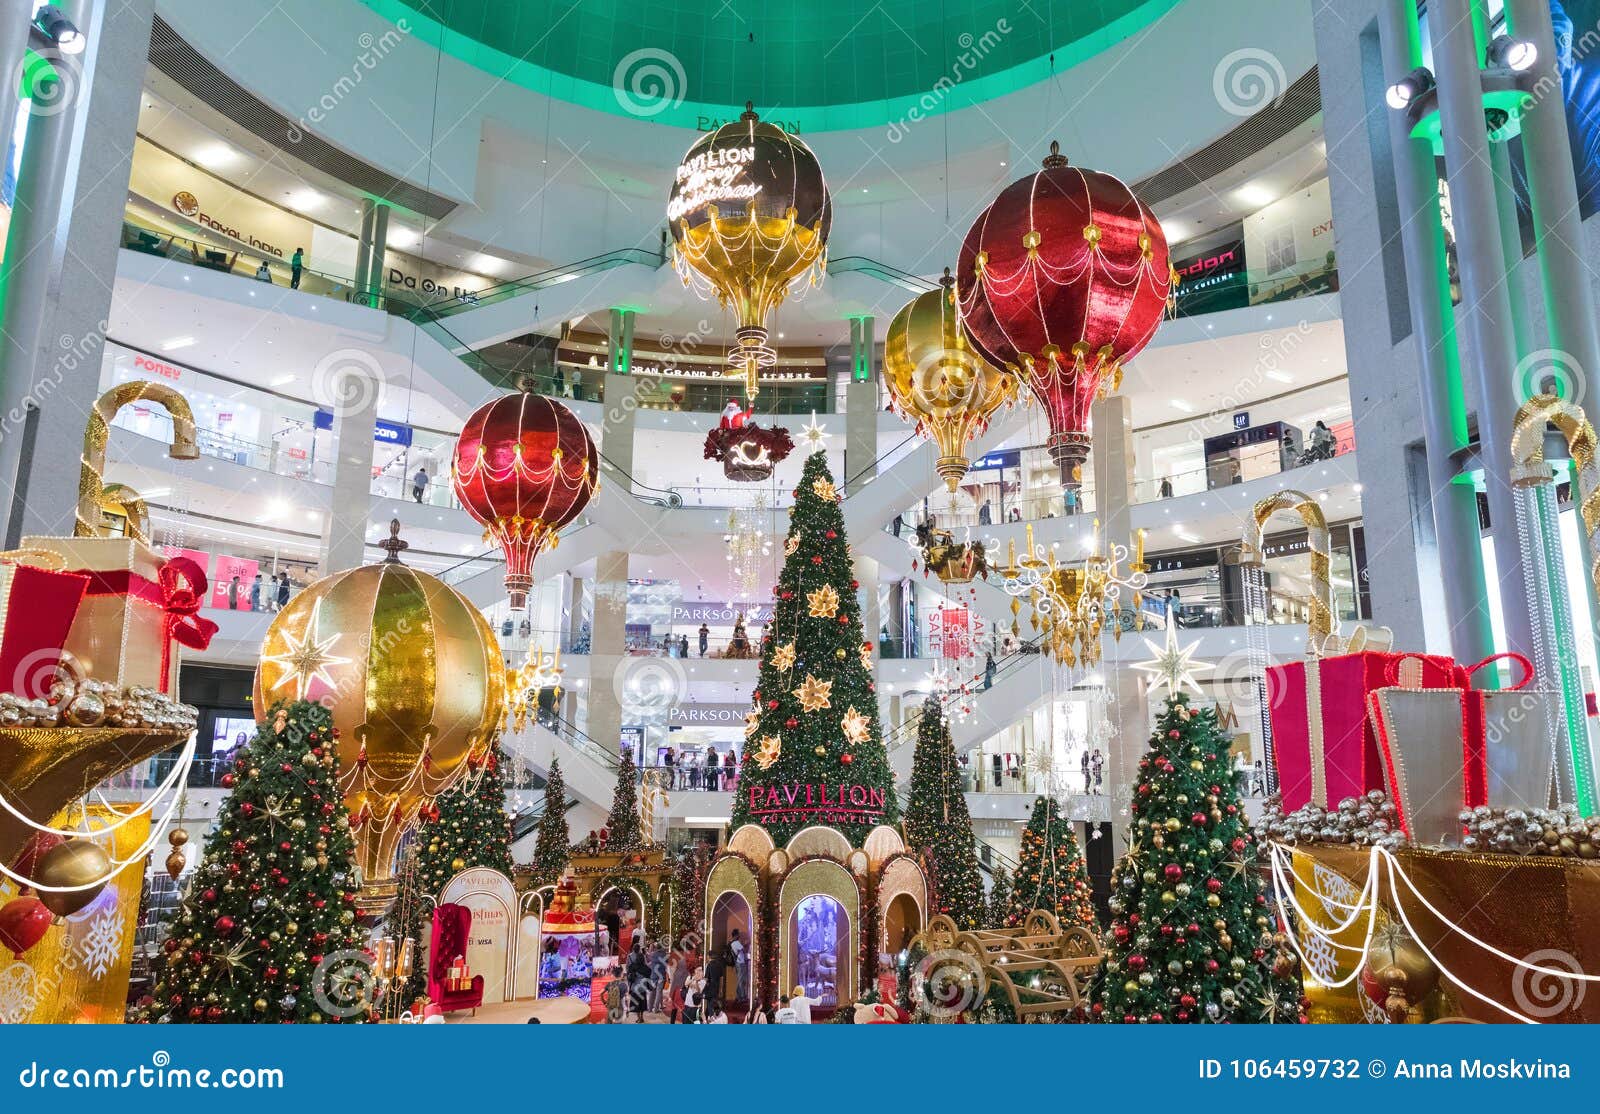 Malaysia Kuala Lumpur 2017 December 07 Pavilion Shopping Mall Decorated For Christmas And New 2018 Year Stock Photo 106459732 Megapixl